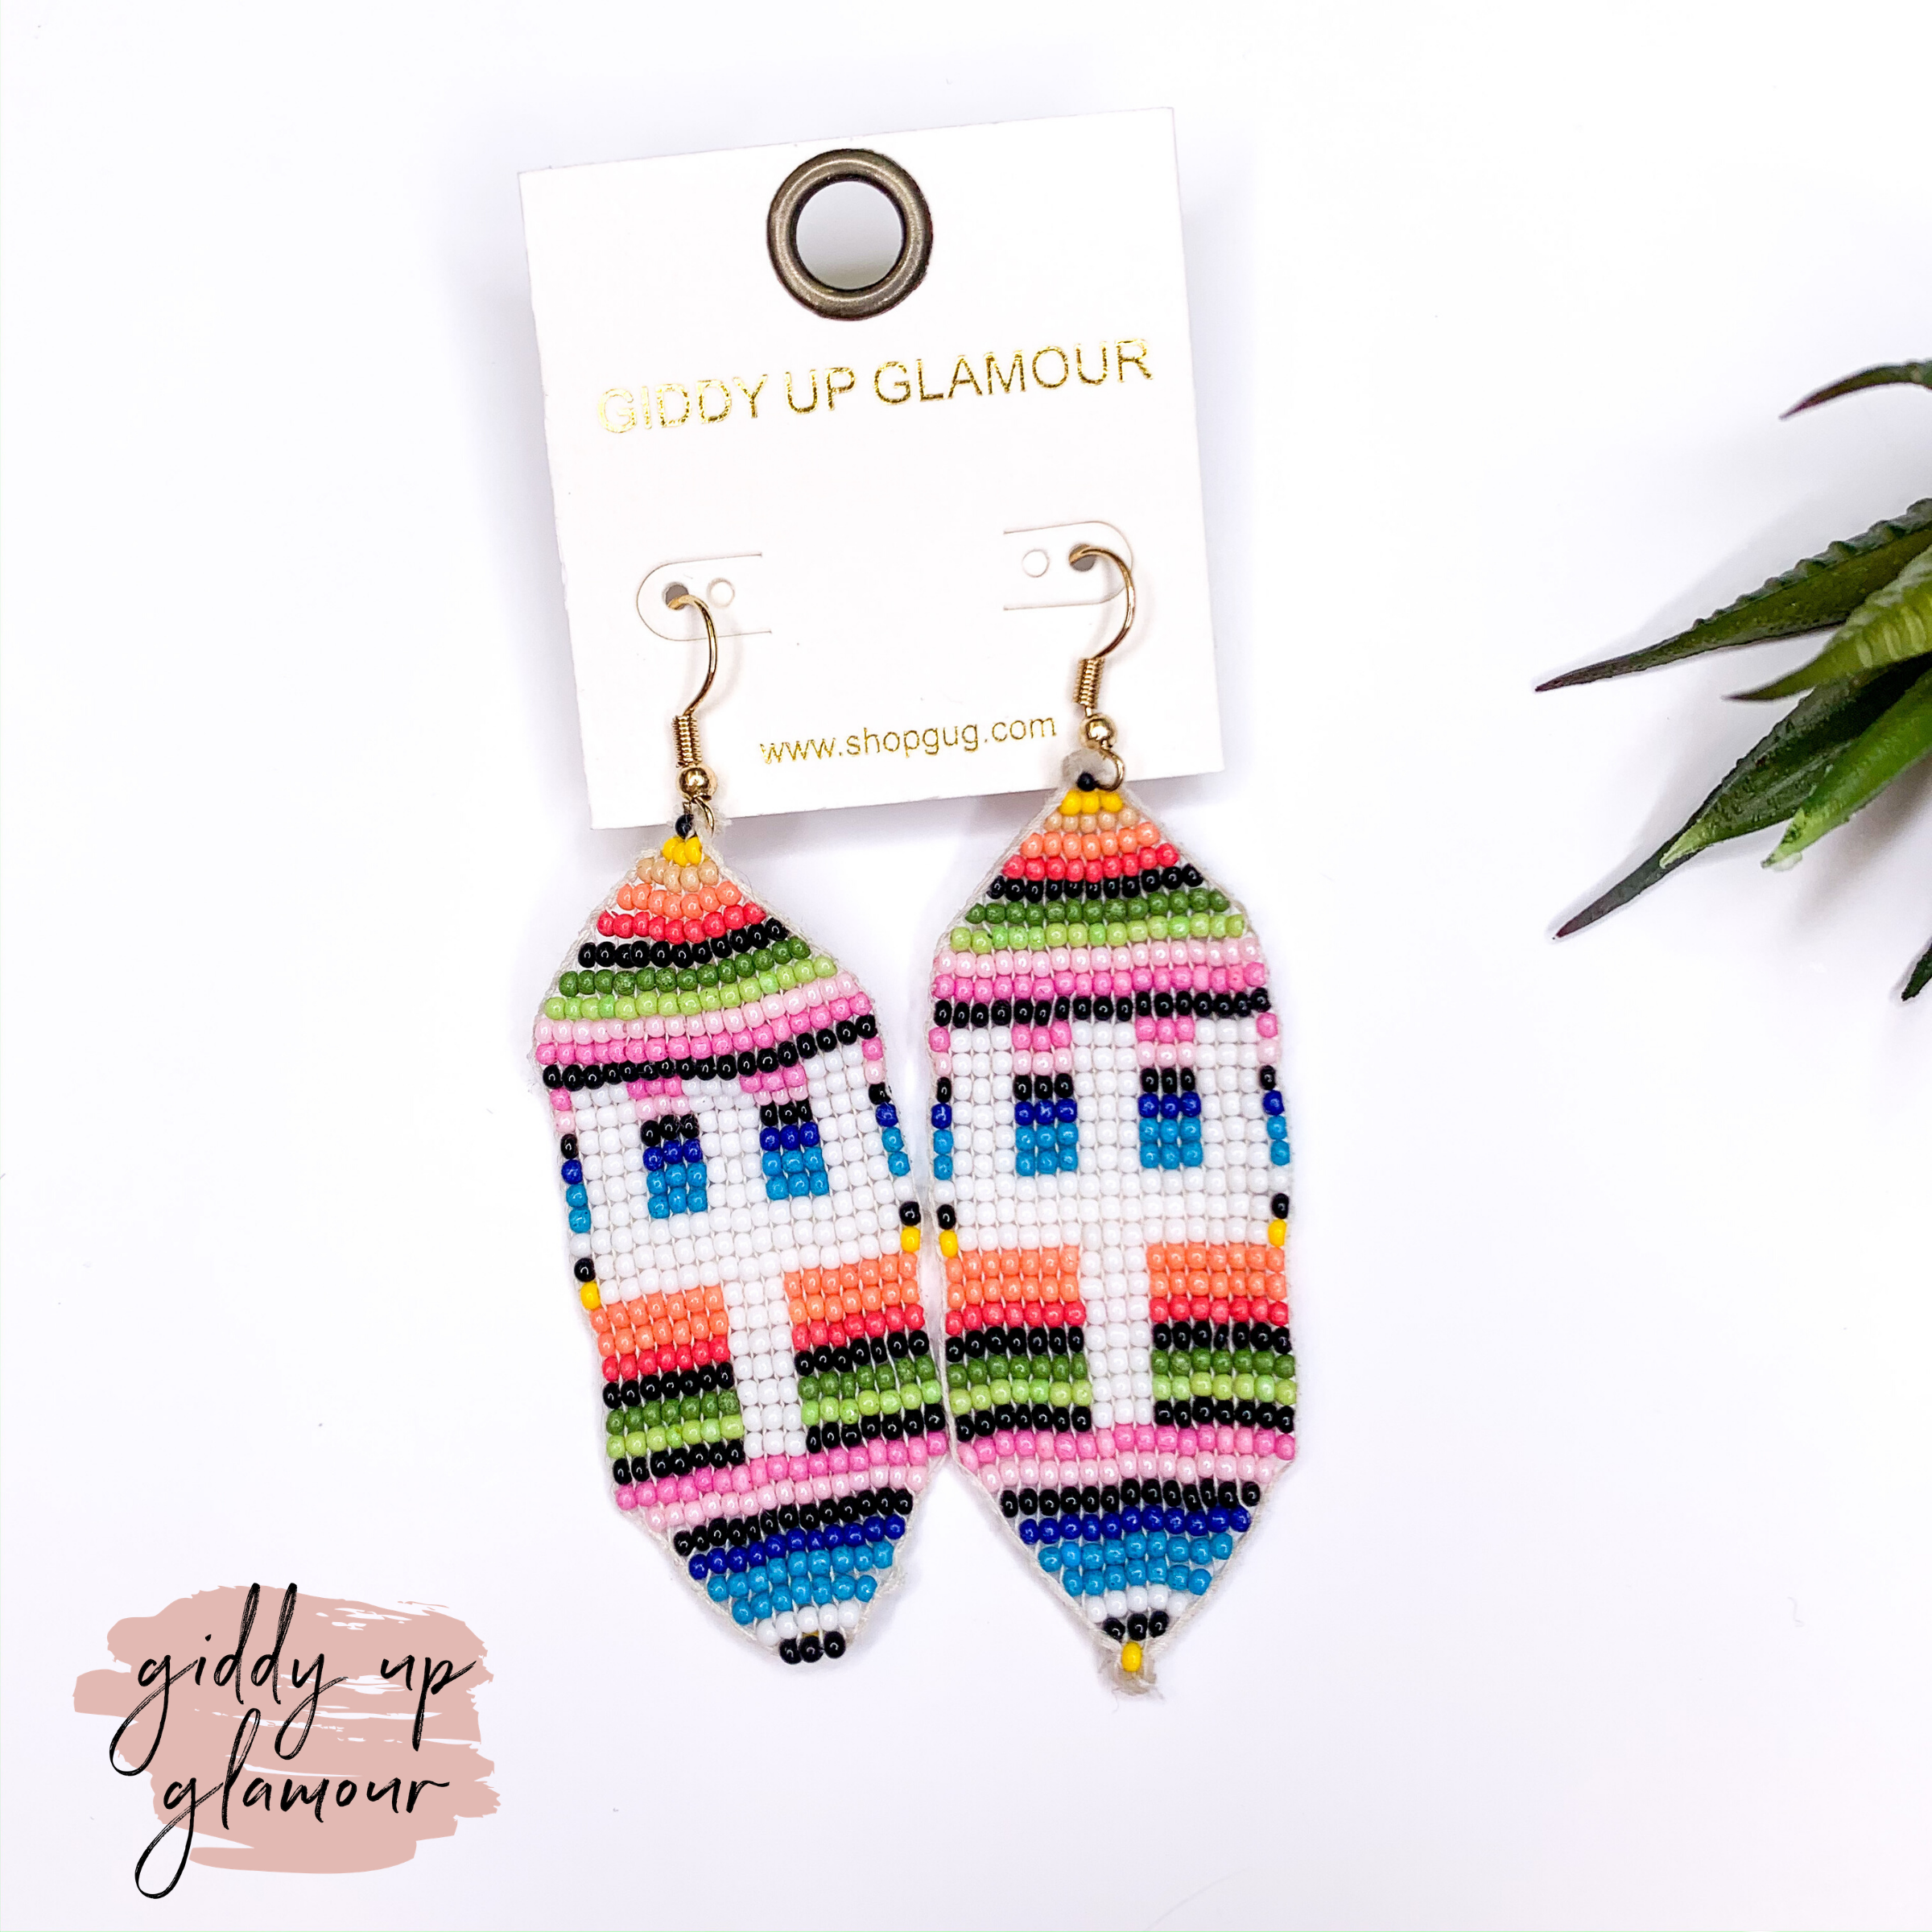 Beaded Ribbon Drop Earrings with Cactus in Serape - Giddy Up Glamour Boutique